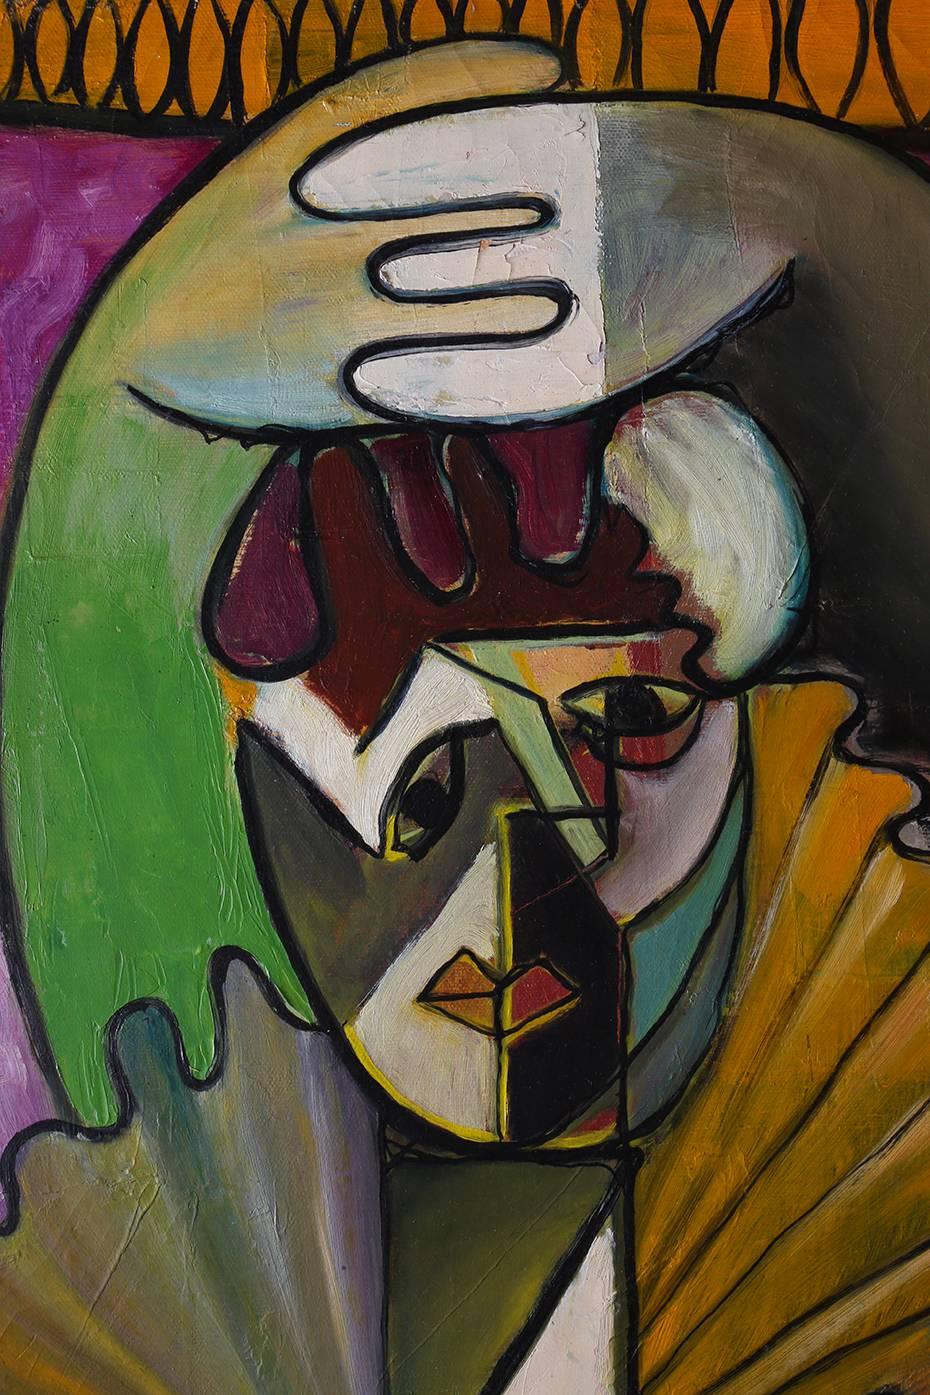 A colorful vintage 1940s - 1950s modernist oil on canvas abstract painting by the 20th Century American sculptor and painter, Charles Luedtke. Painting is of a fragmented costumed clown, the artist was a native of Wisconsin, he also excelled